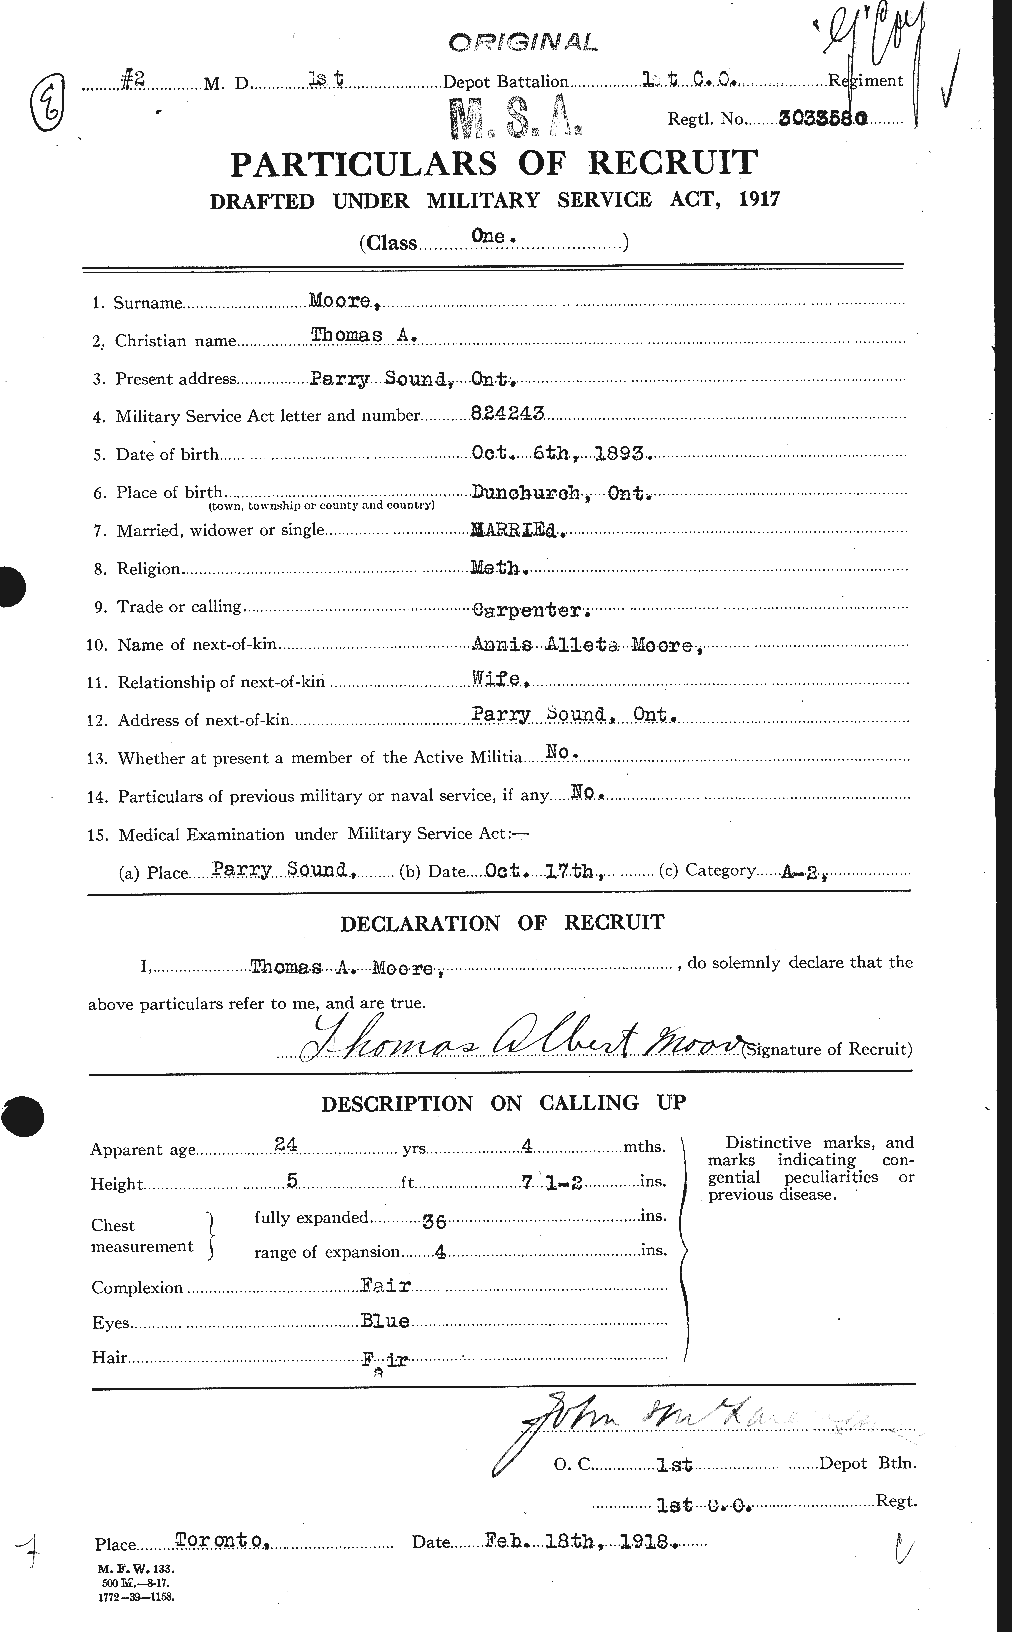 Personnel Records of the First World War - CEF 505636a